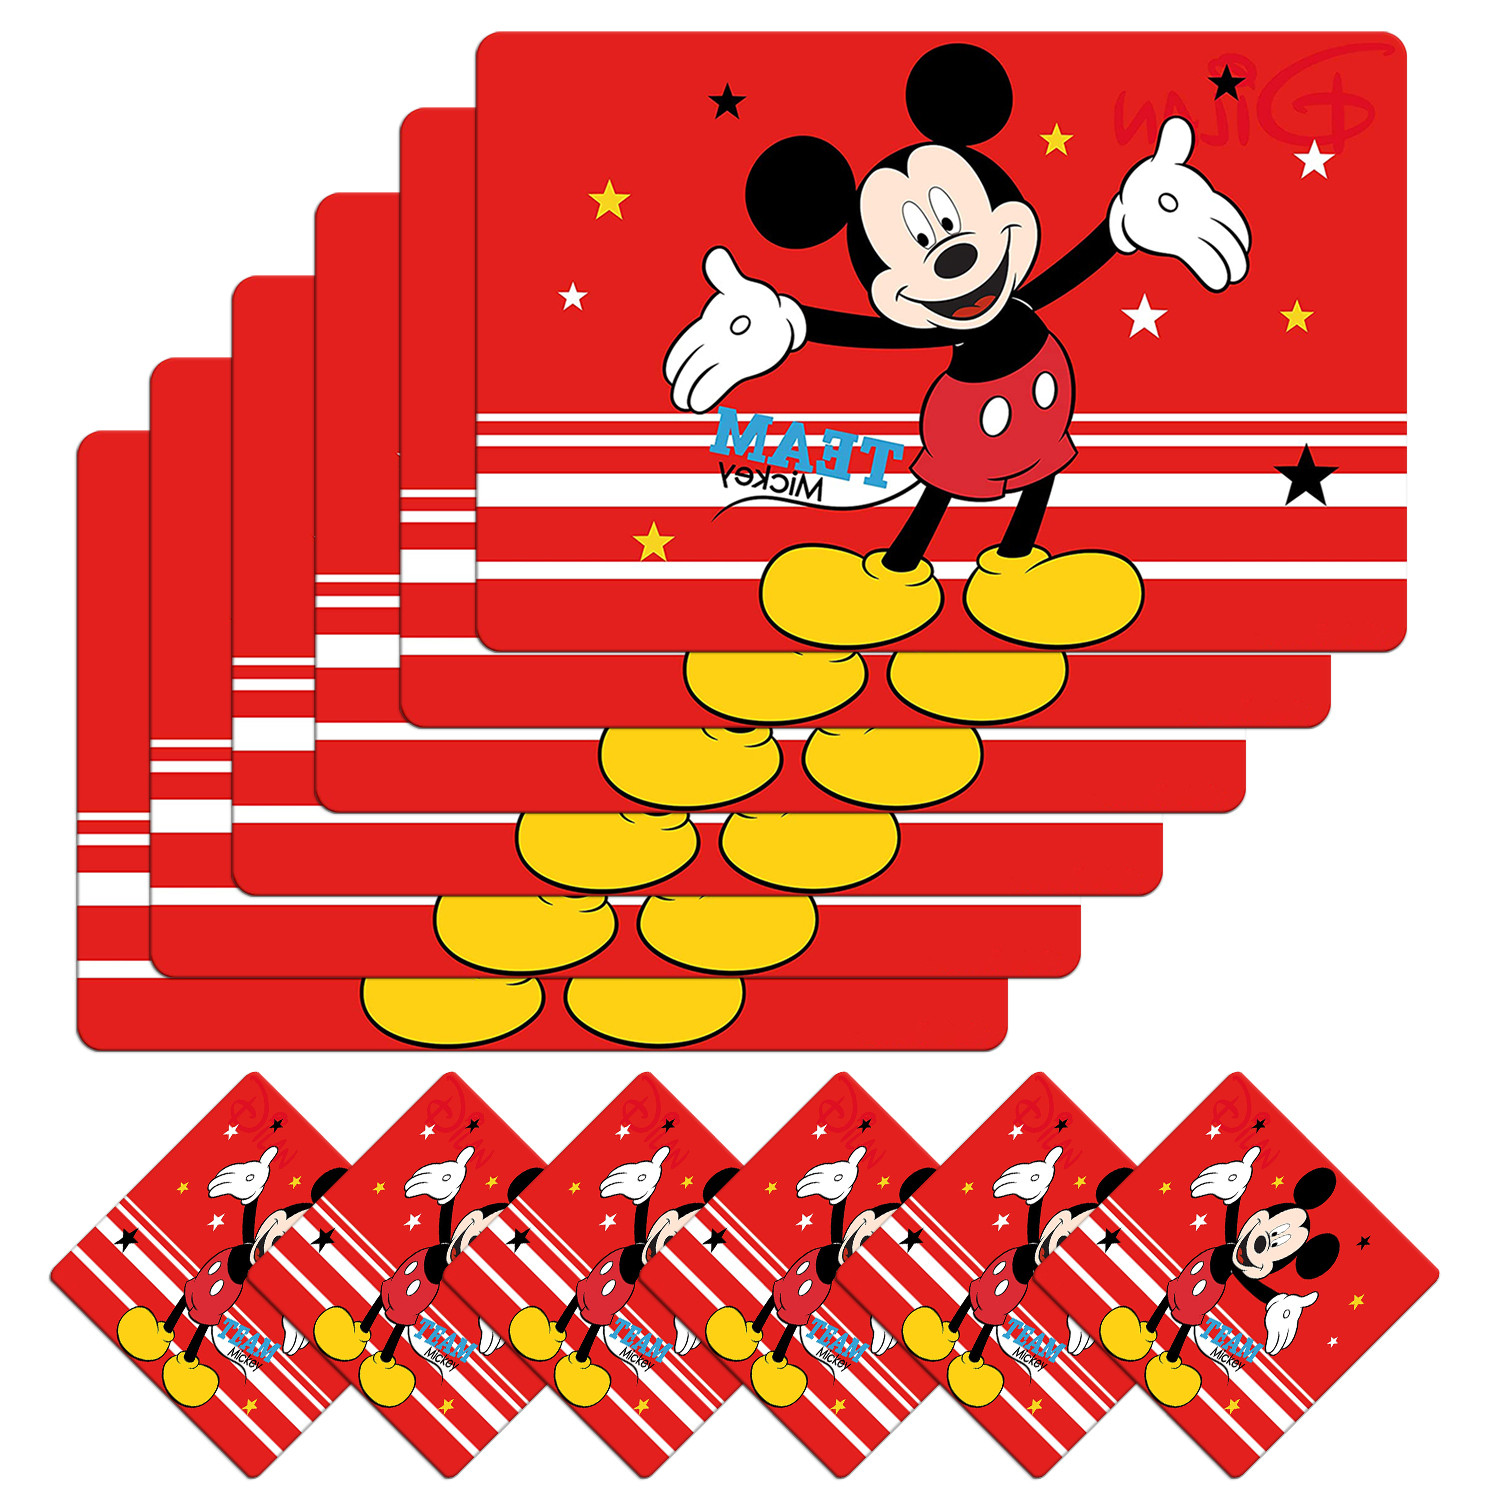 Kuber Industries Multiuses Mickey Mouse Print PVC Table Placemat With 6 Coasters for kitchen, Dining Table Set of 6 (Red)